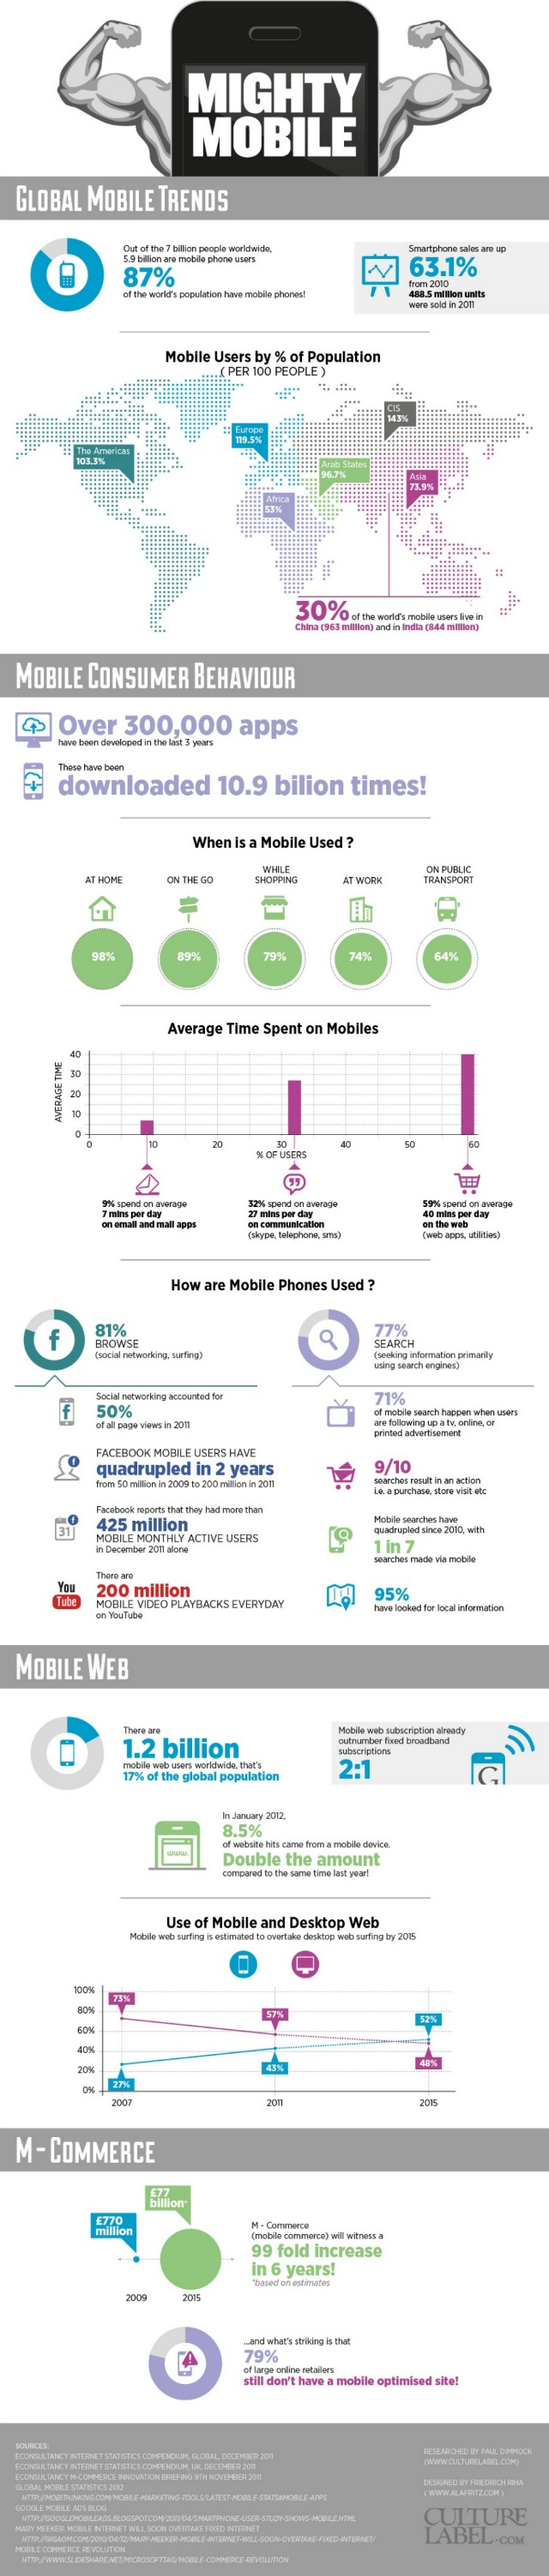 Global Mobile Trends infographic